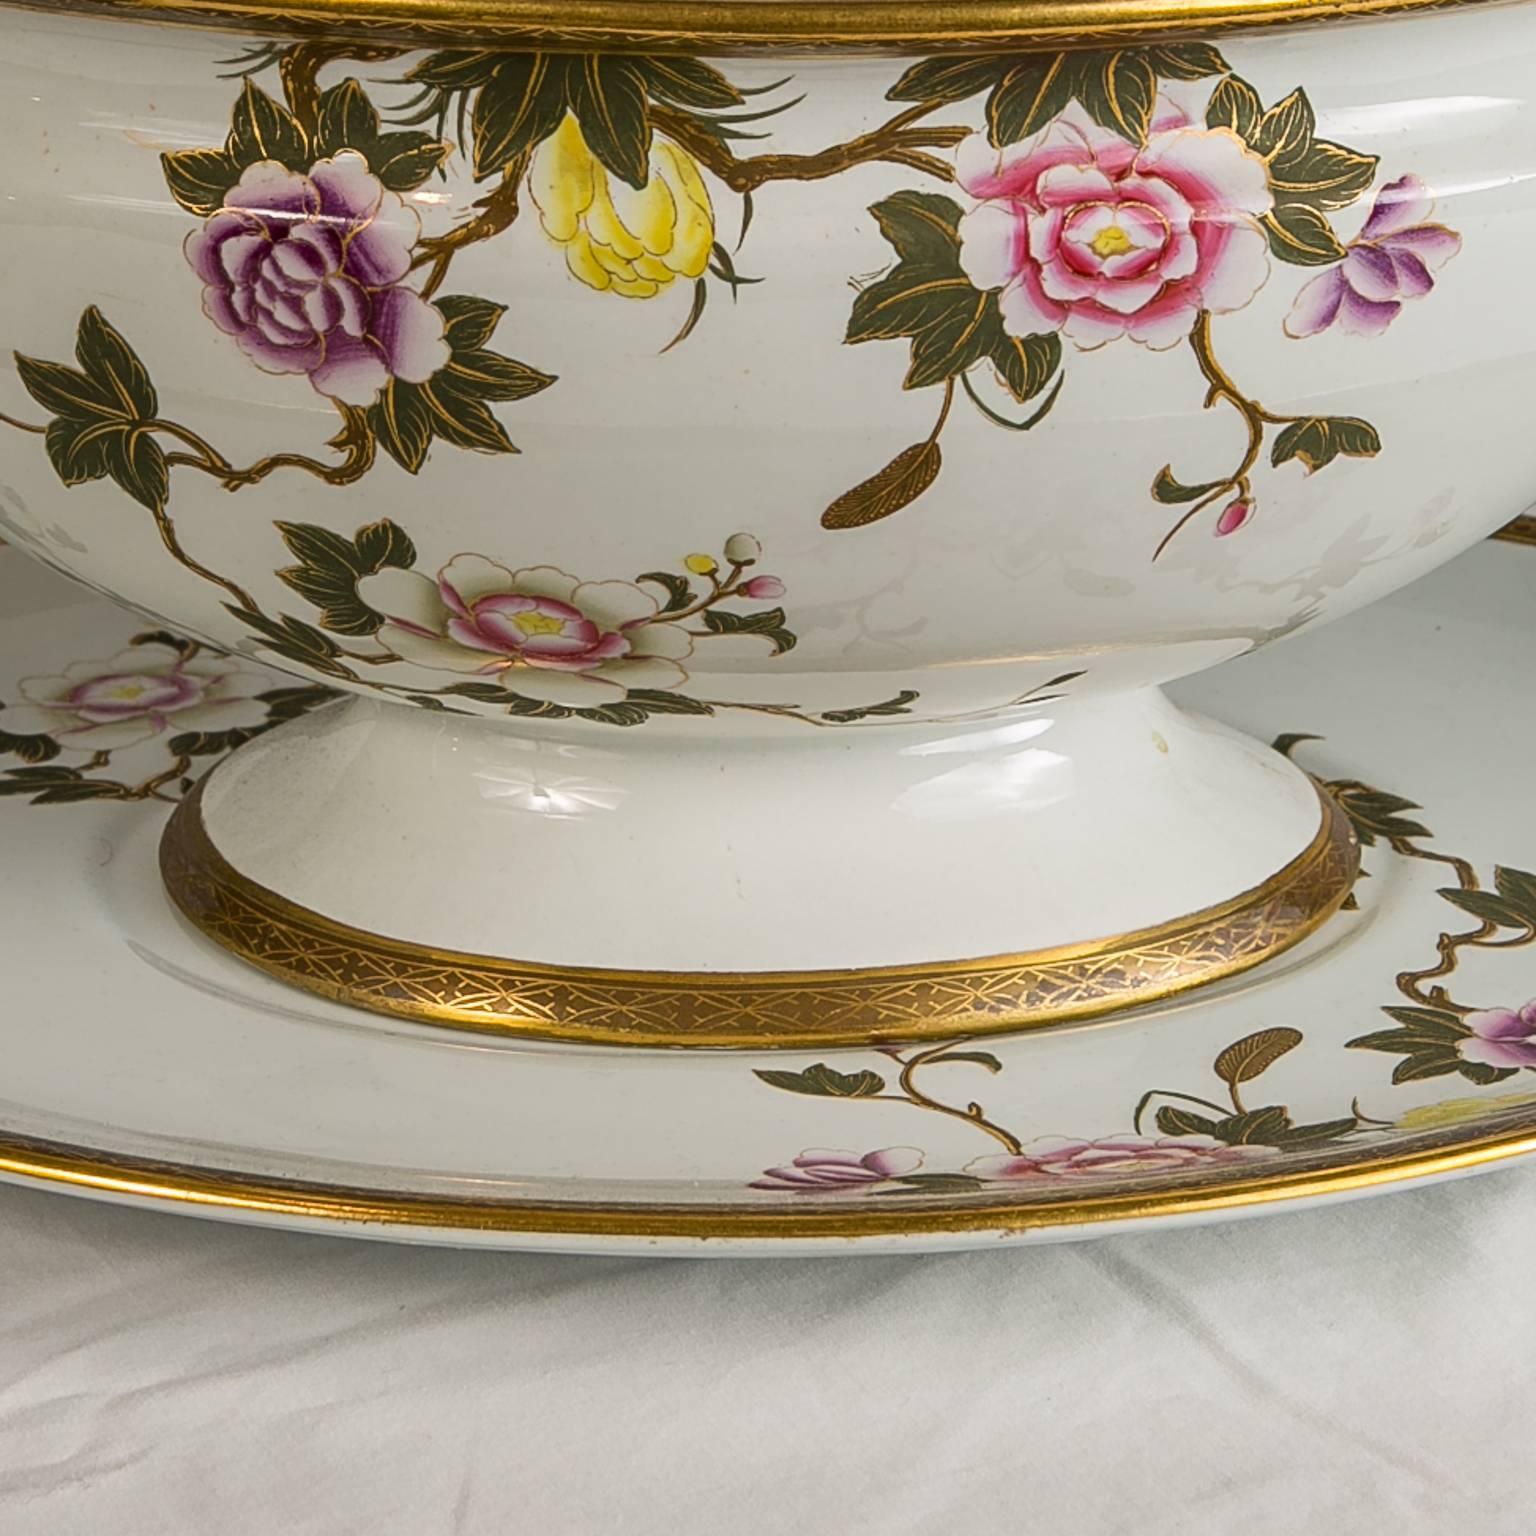 Aesthetic Movement Royal Worcester Porcelain Soup Tureen Made in 1851 For Sale